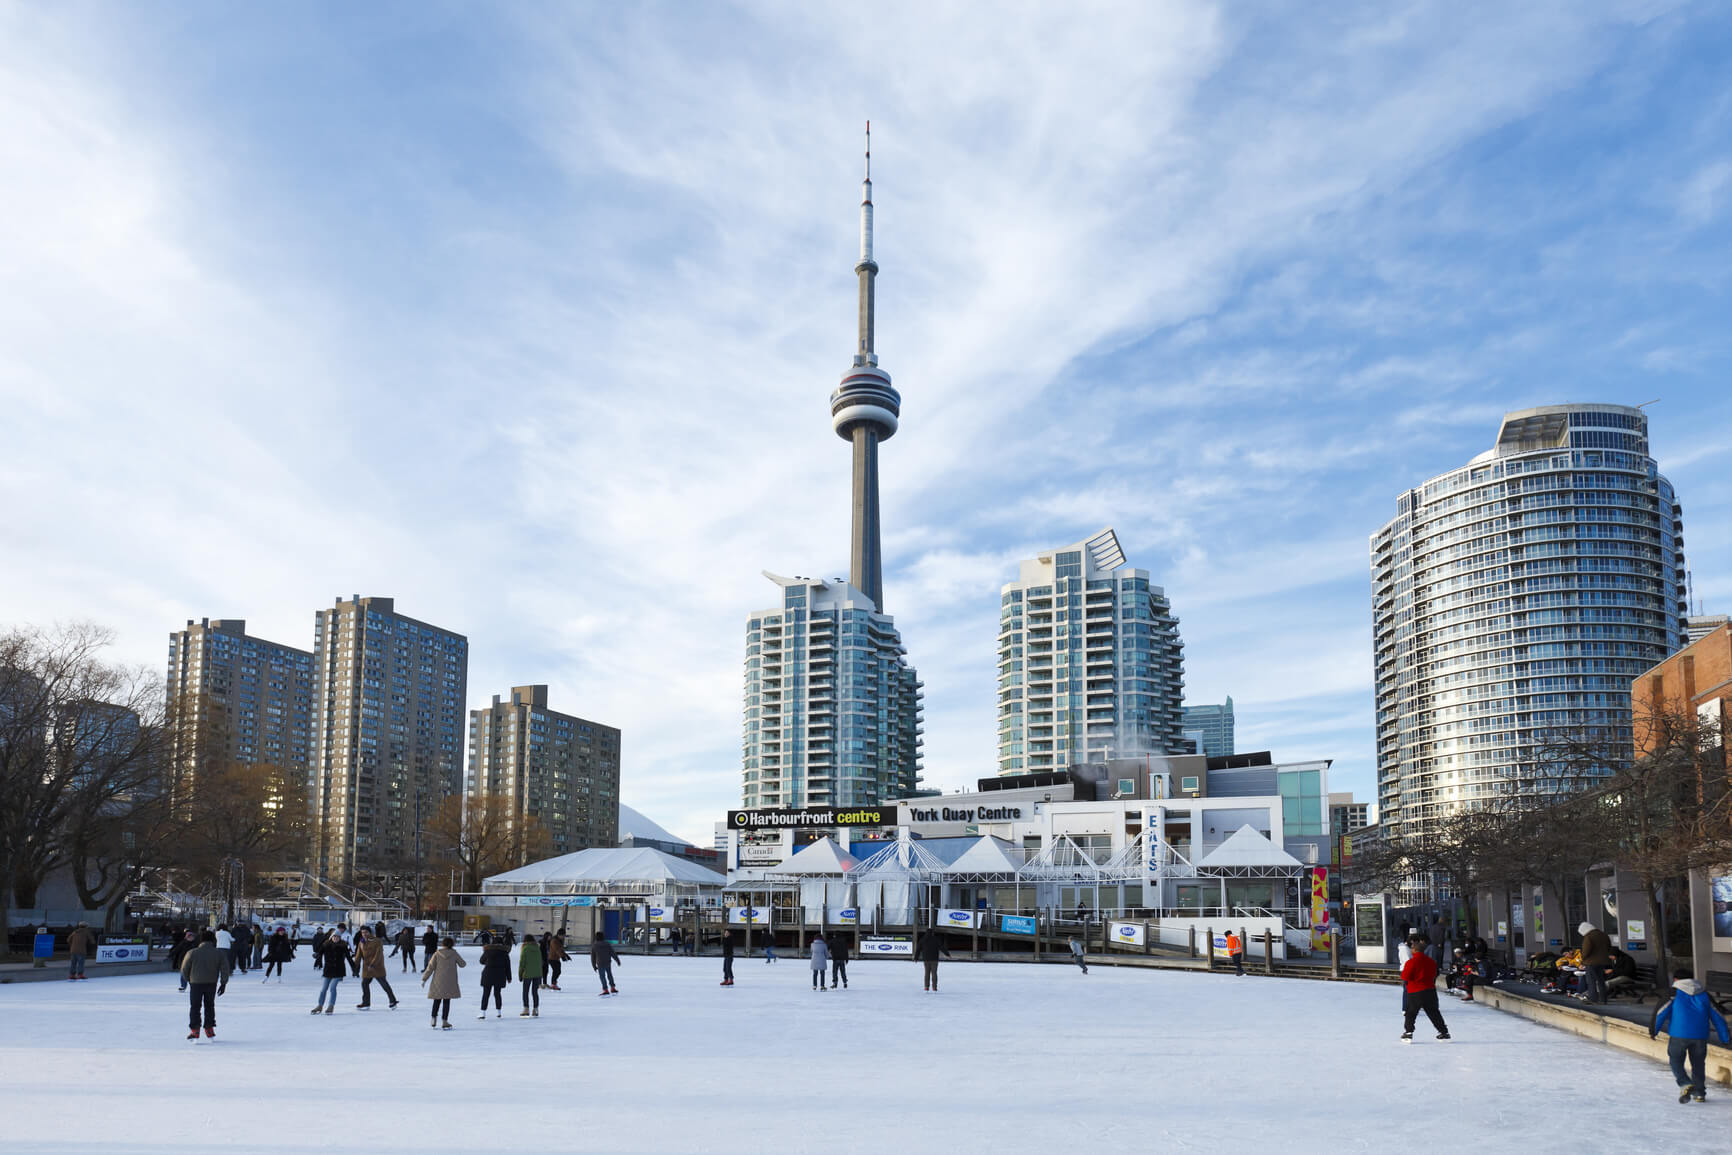 Non-stop from Amsterdam, Netherlands to Toronto, Canada for only €277 roundtrip